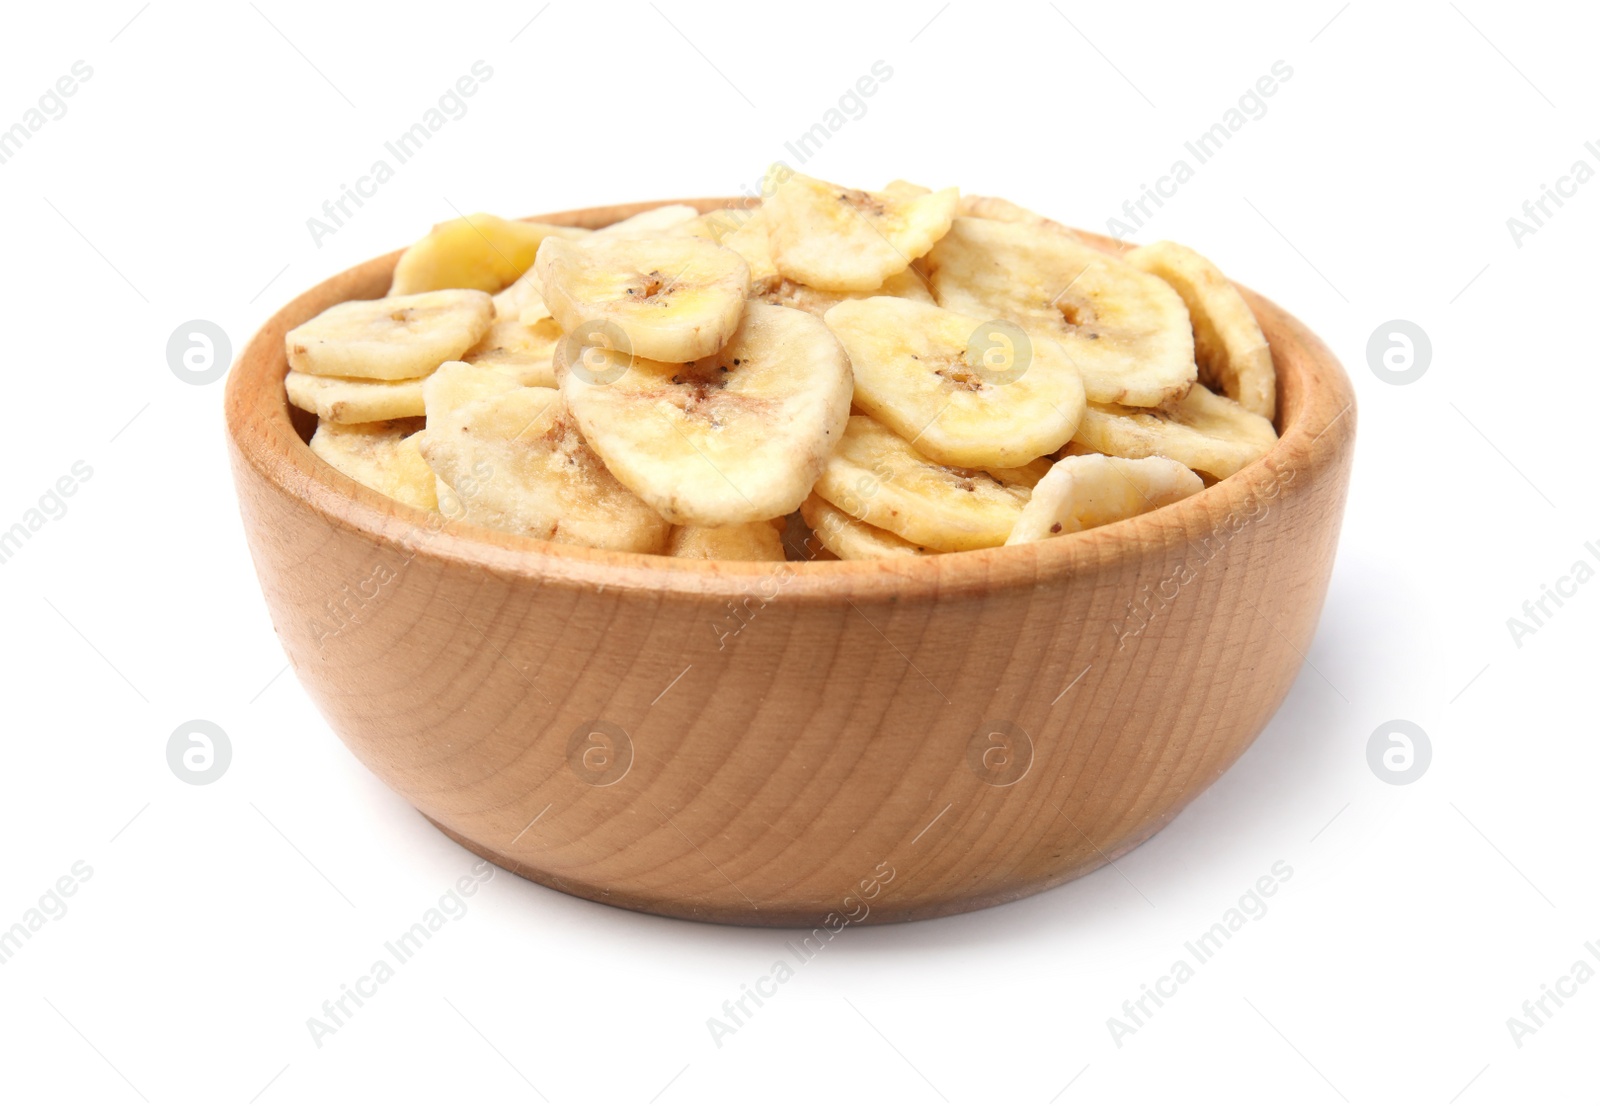 Photo of Wooden bowl with sweet banana slices on white background. Dried fruit as healthy snack